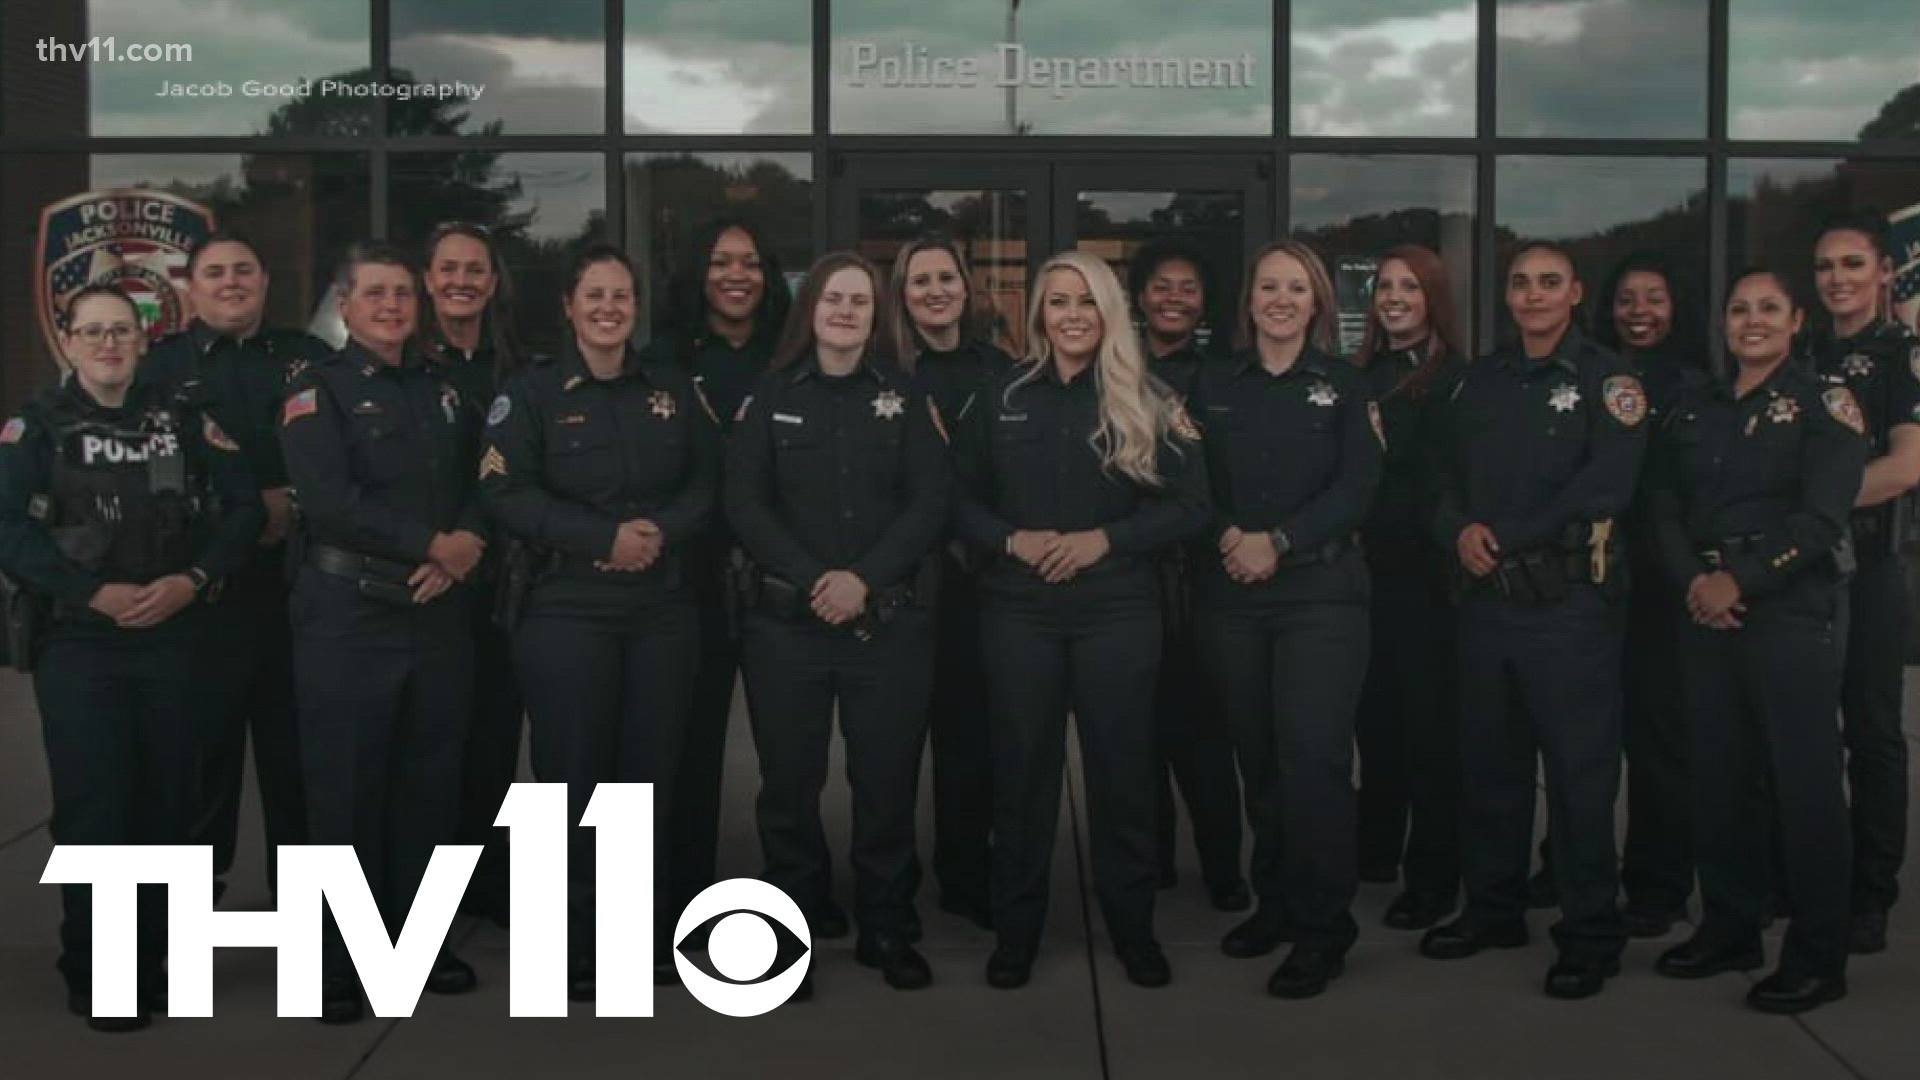 The Jacksonville Police Department has made the pledge to recruit, not only more women, but more officers that help reflect the representation of the community.